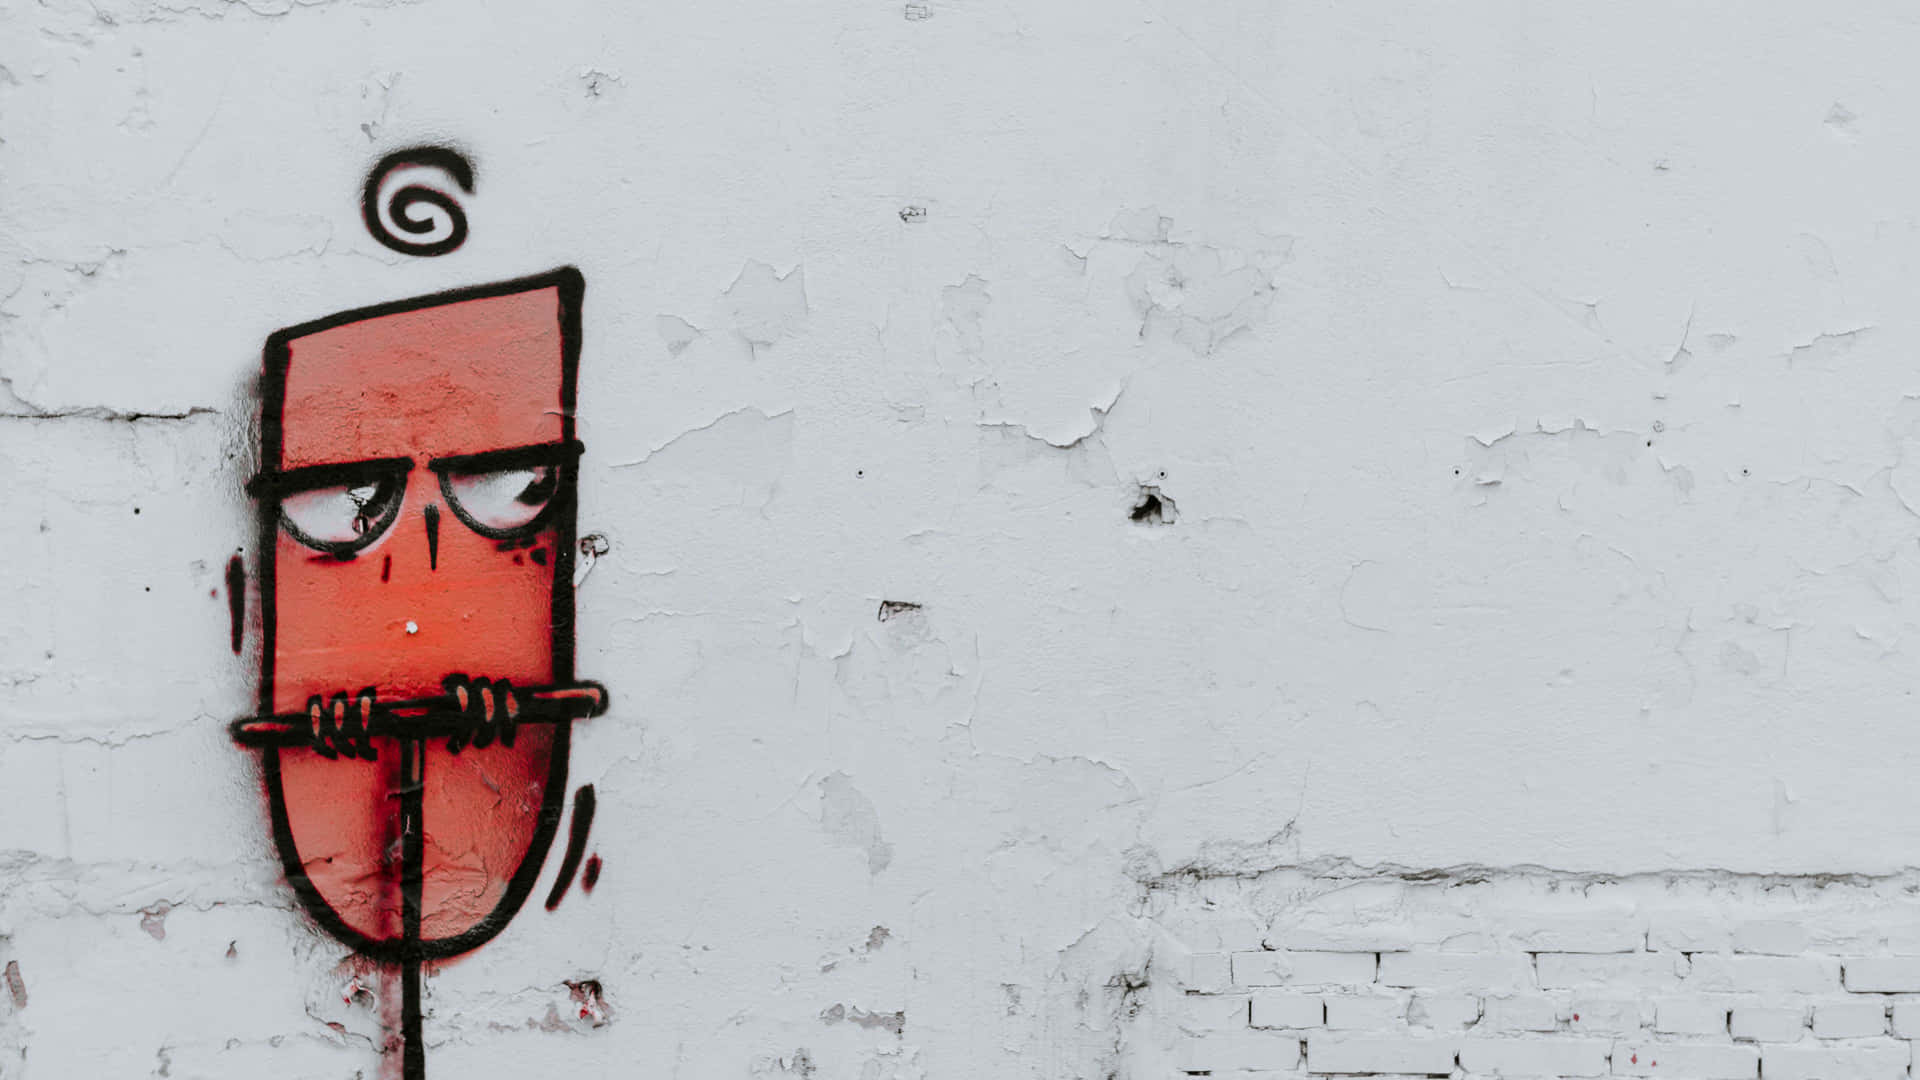 Graffiti Wall Art With A Square Face And Locked Mouth Background